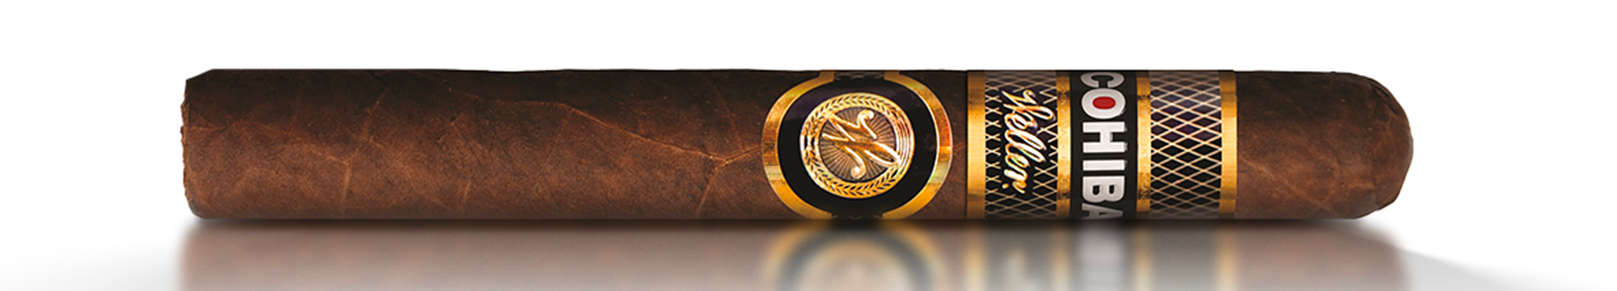 A picture of a Weller by Cohiba cigar, a highly collectible item due to its rarity and premium quality.